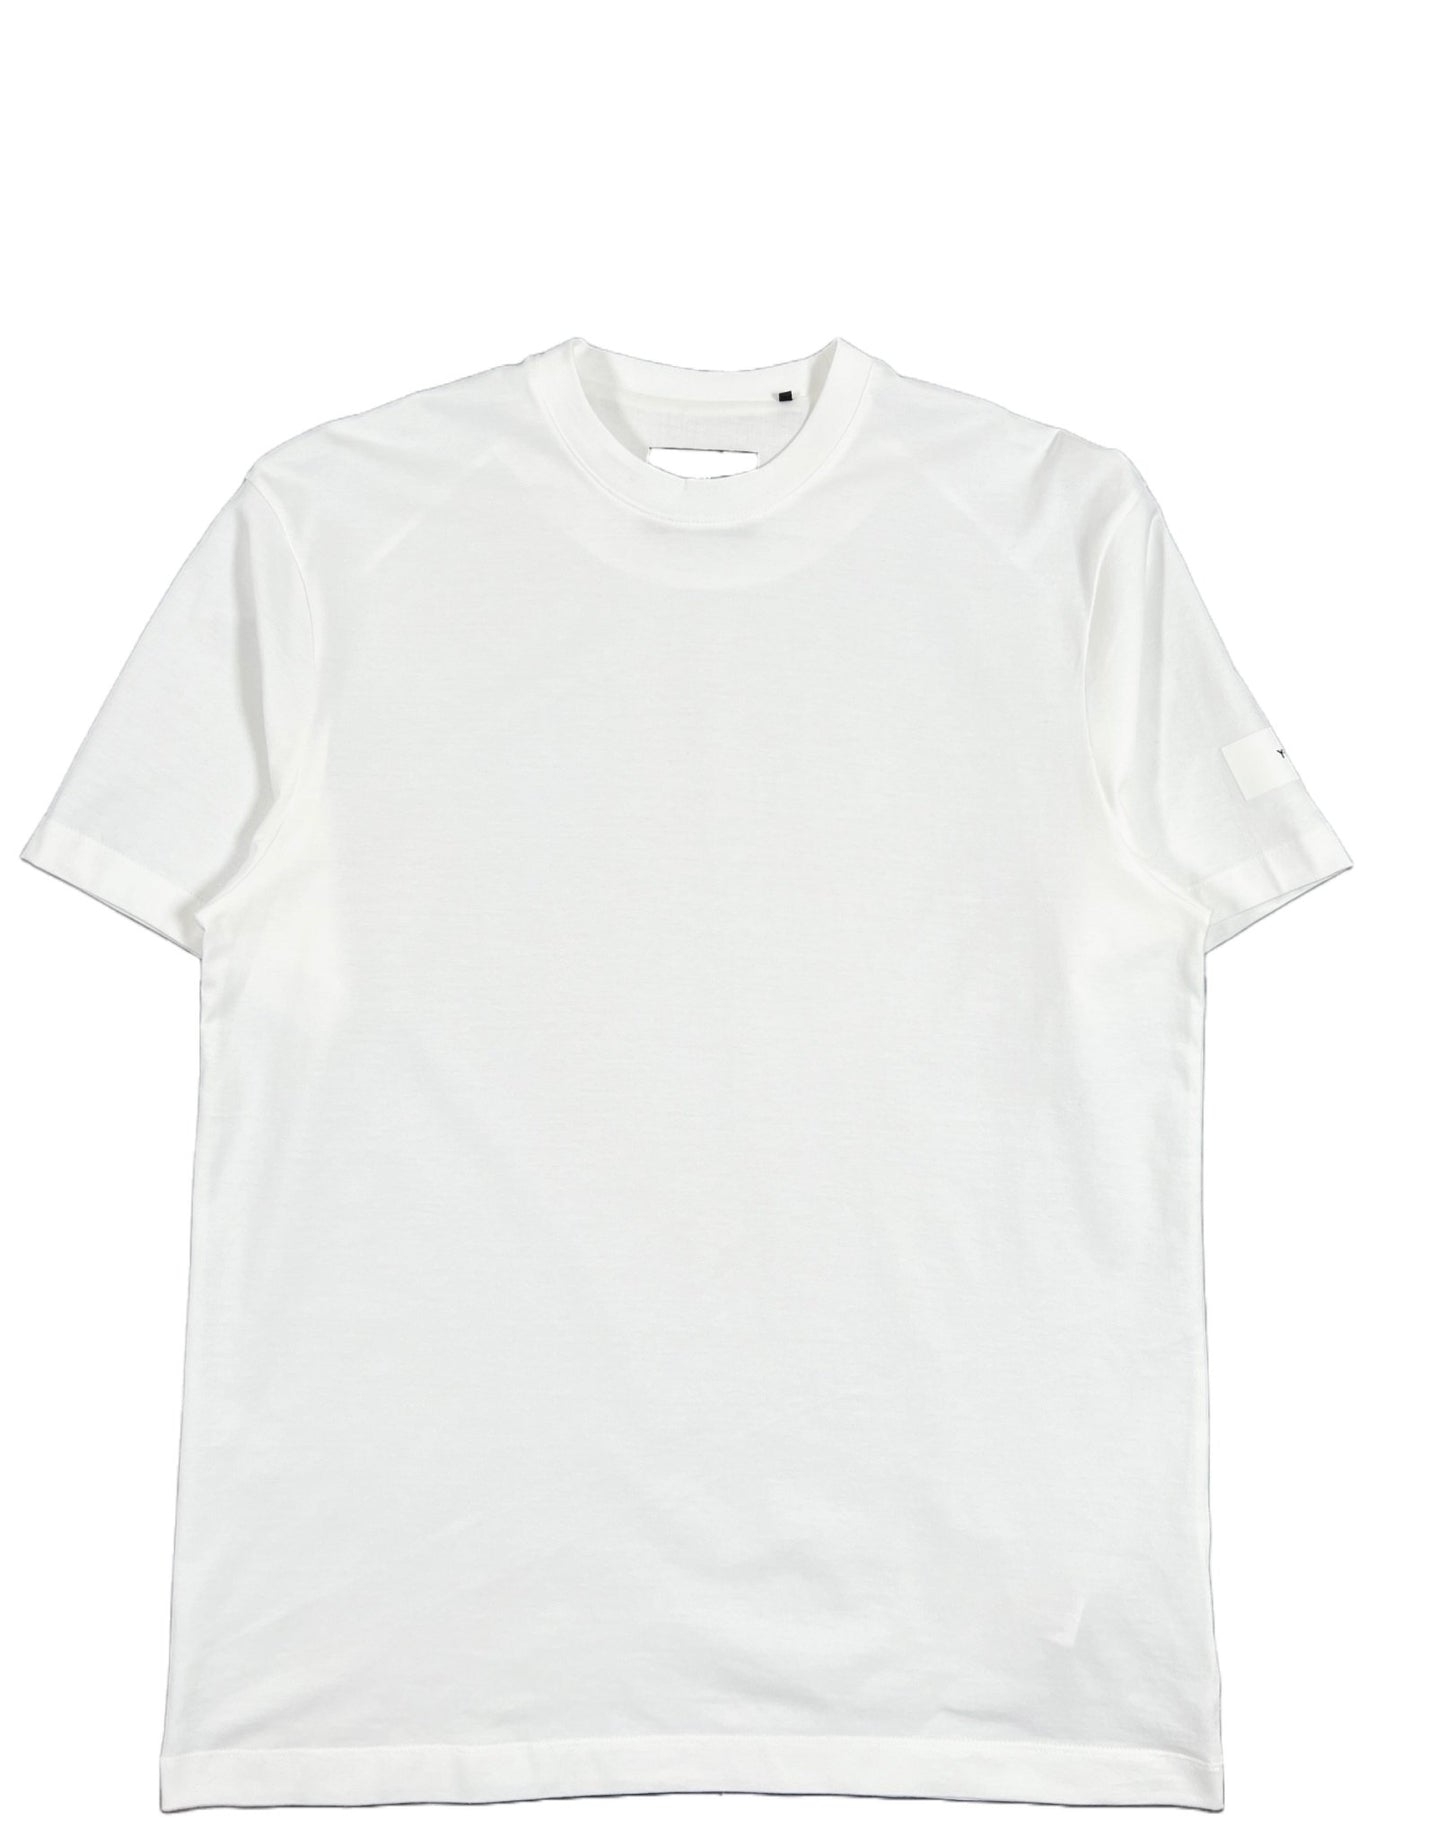 A white ADIDAS x Y-3 IB4787 RELAXED SS TEE CORE WHITE with logo detail on a white background.